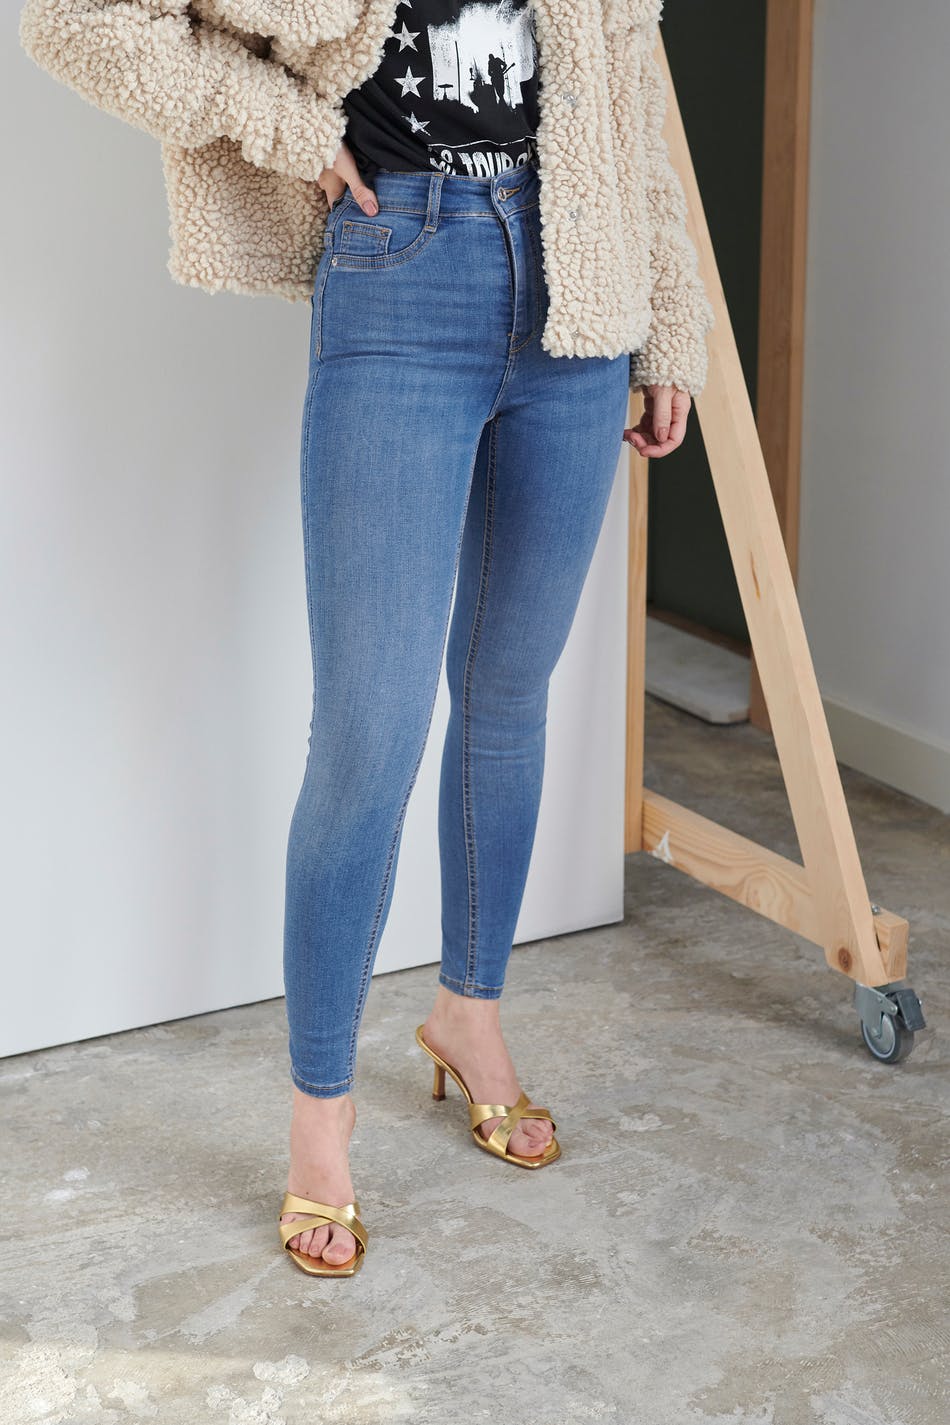 gina tricot perfect jeans molly